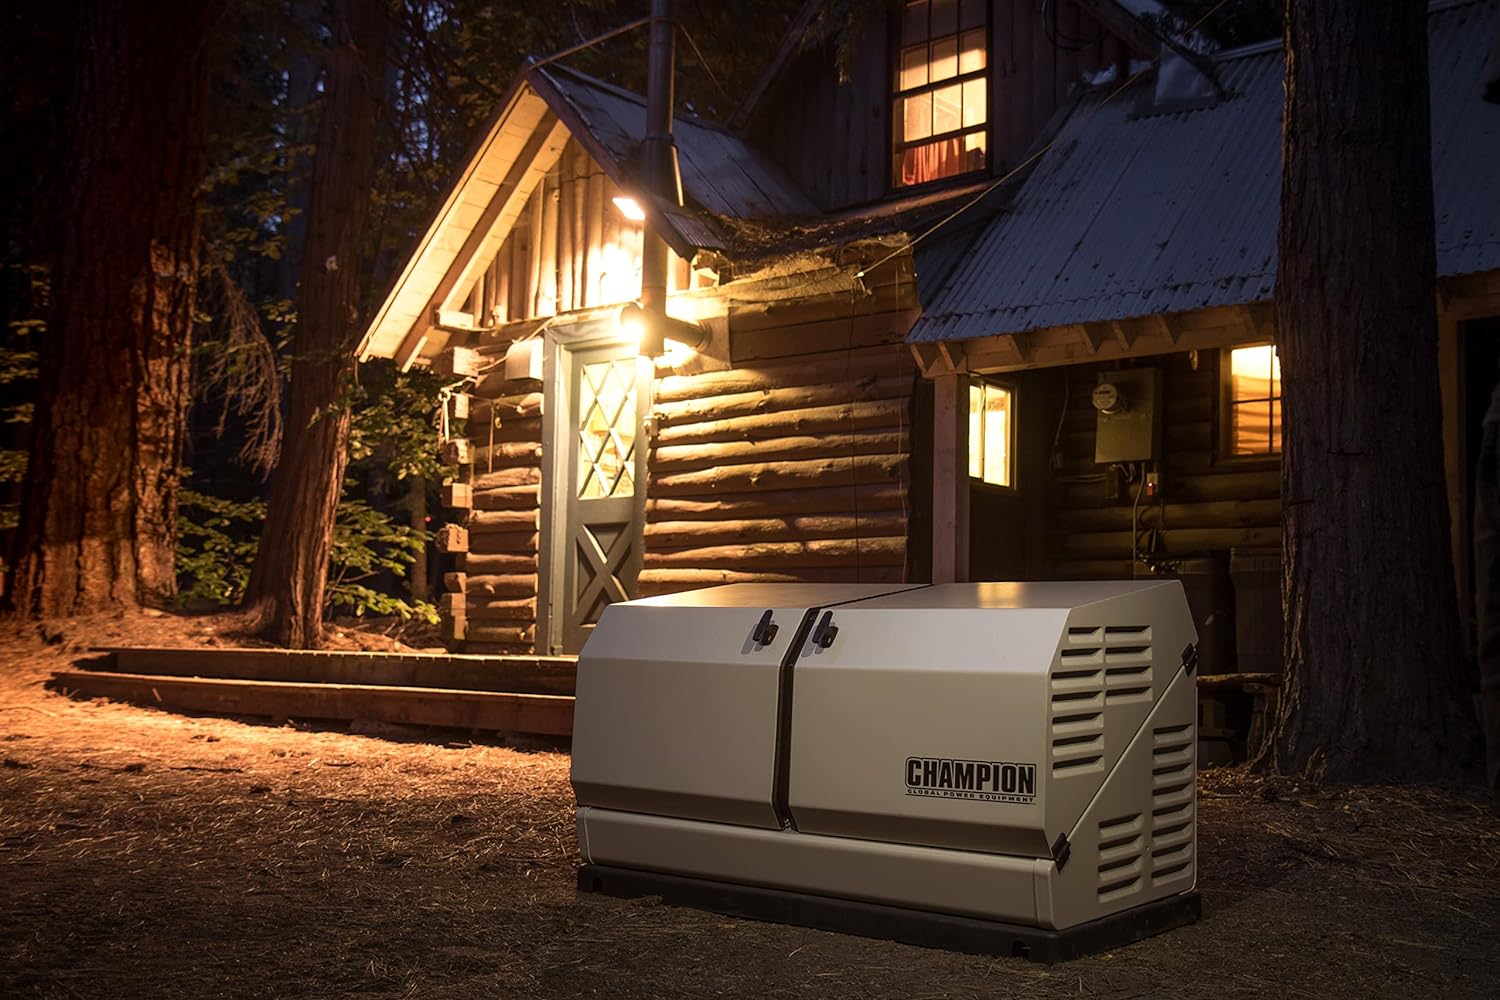 Champion Power Equipment 100837 Review: The Ultimate 14kW Home Standby Generator for Total Home Management